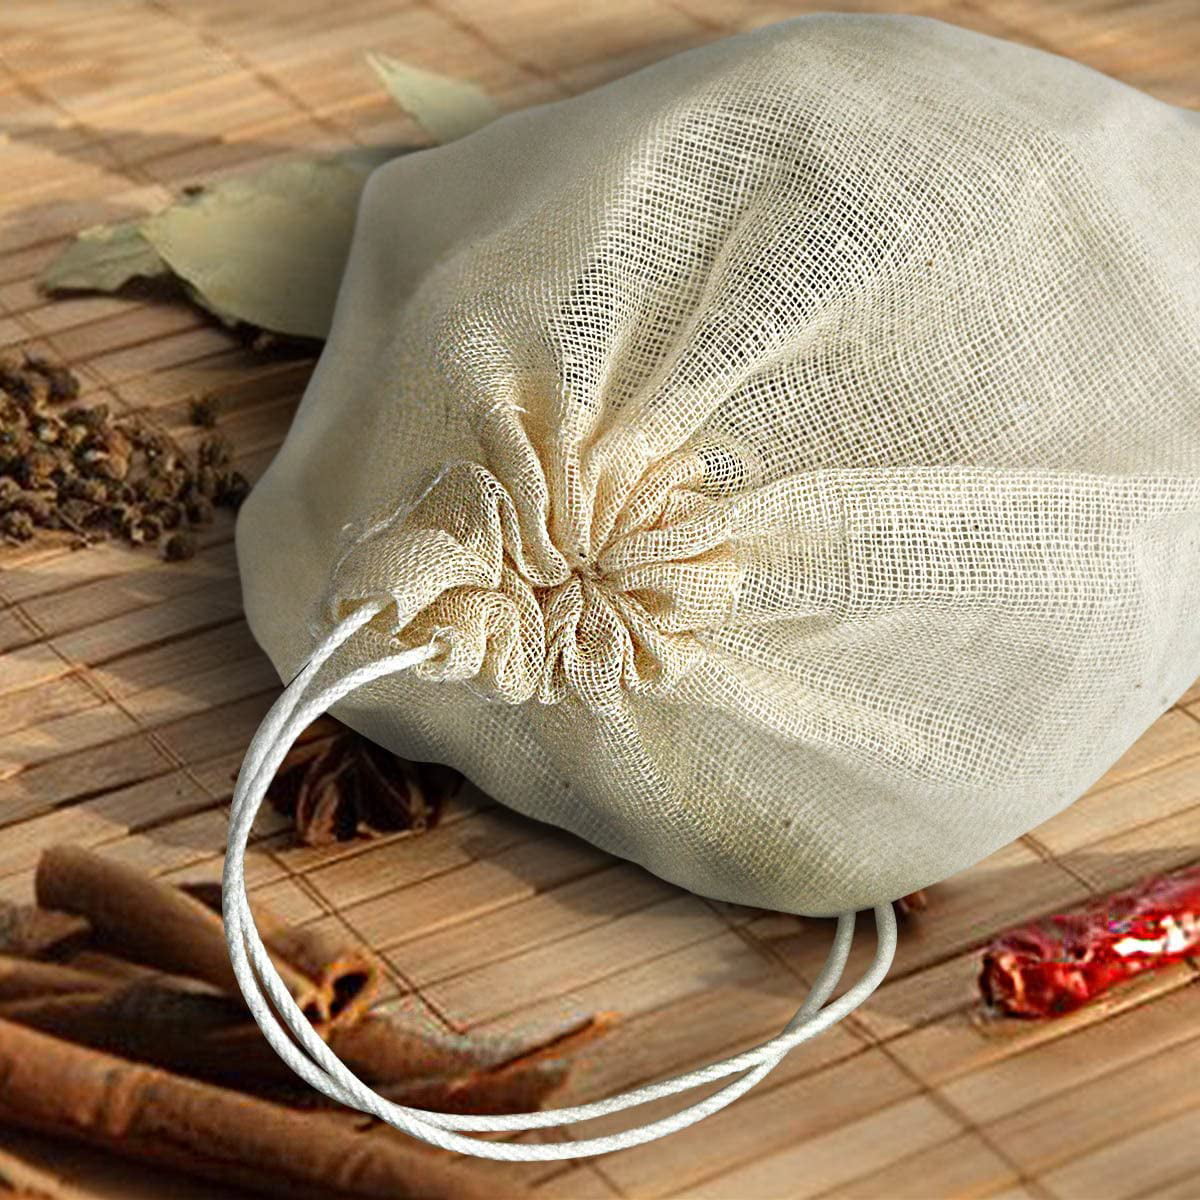 Coffee Tea Brew Bags Nut Milk Tea Juice Bag 3x4 Natural Cotton Spice Filter Bags 12Pack Reusable Drawstring Cotton Soup Bags Straining Herbs Cheesecloth Bags